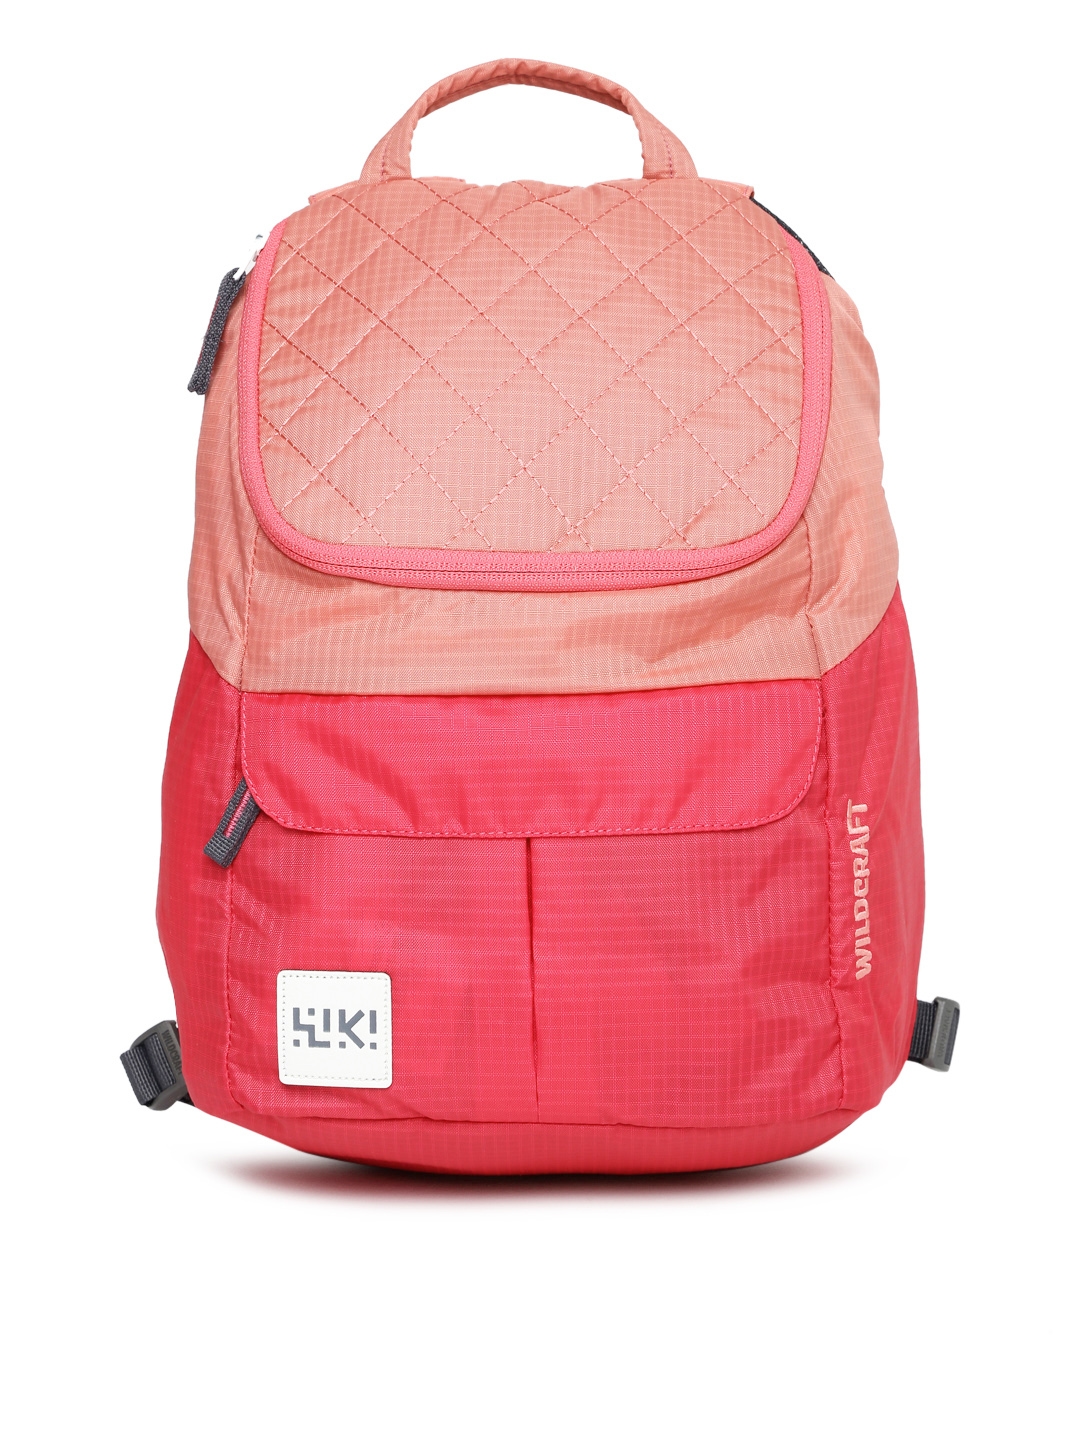 Wildcraft (Wiki) GIRL-2 Coated Backpack Green: Buy Wildcraft (Wiki) GIRL-2  Coated Backpack Green Online at Best Price in India | Nykaa